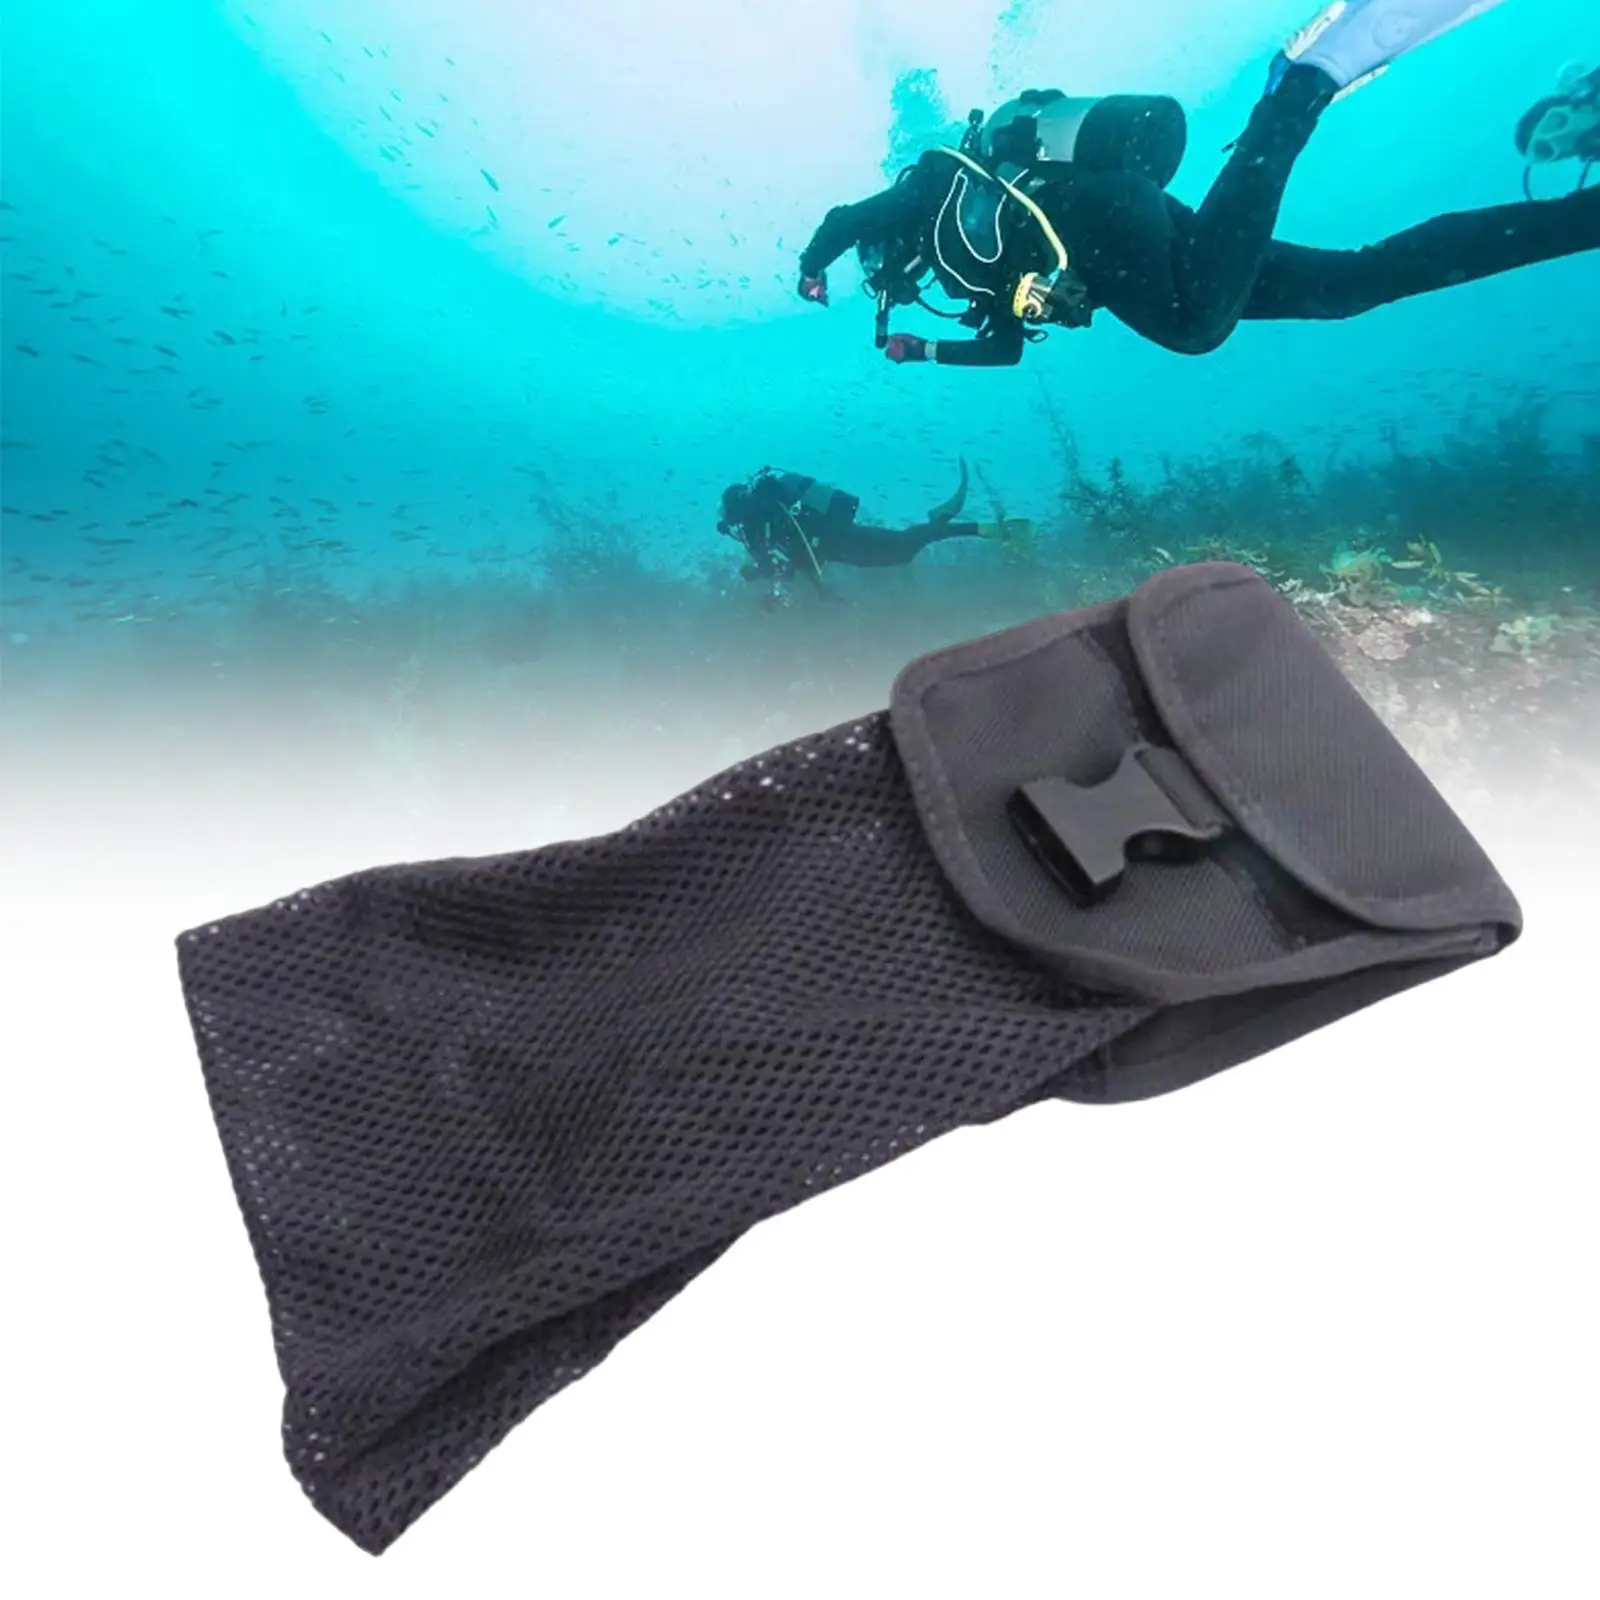 Durable Scuba Diving Mesh Pouch Storage Holder Snorkelling Pocket Gear Bag for Underwater Gears Collecting Seashells Compass